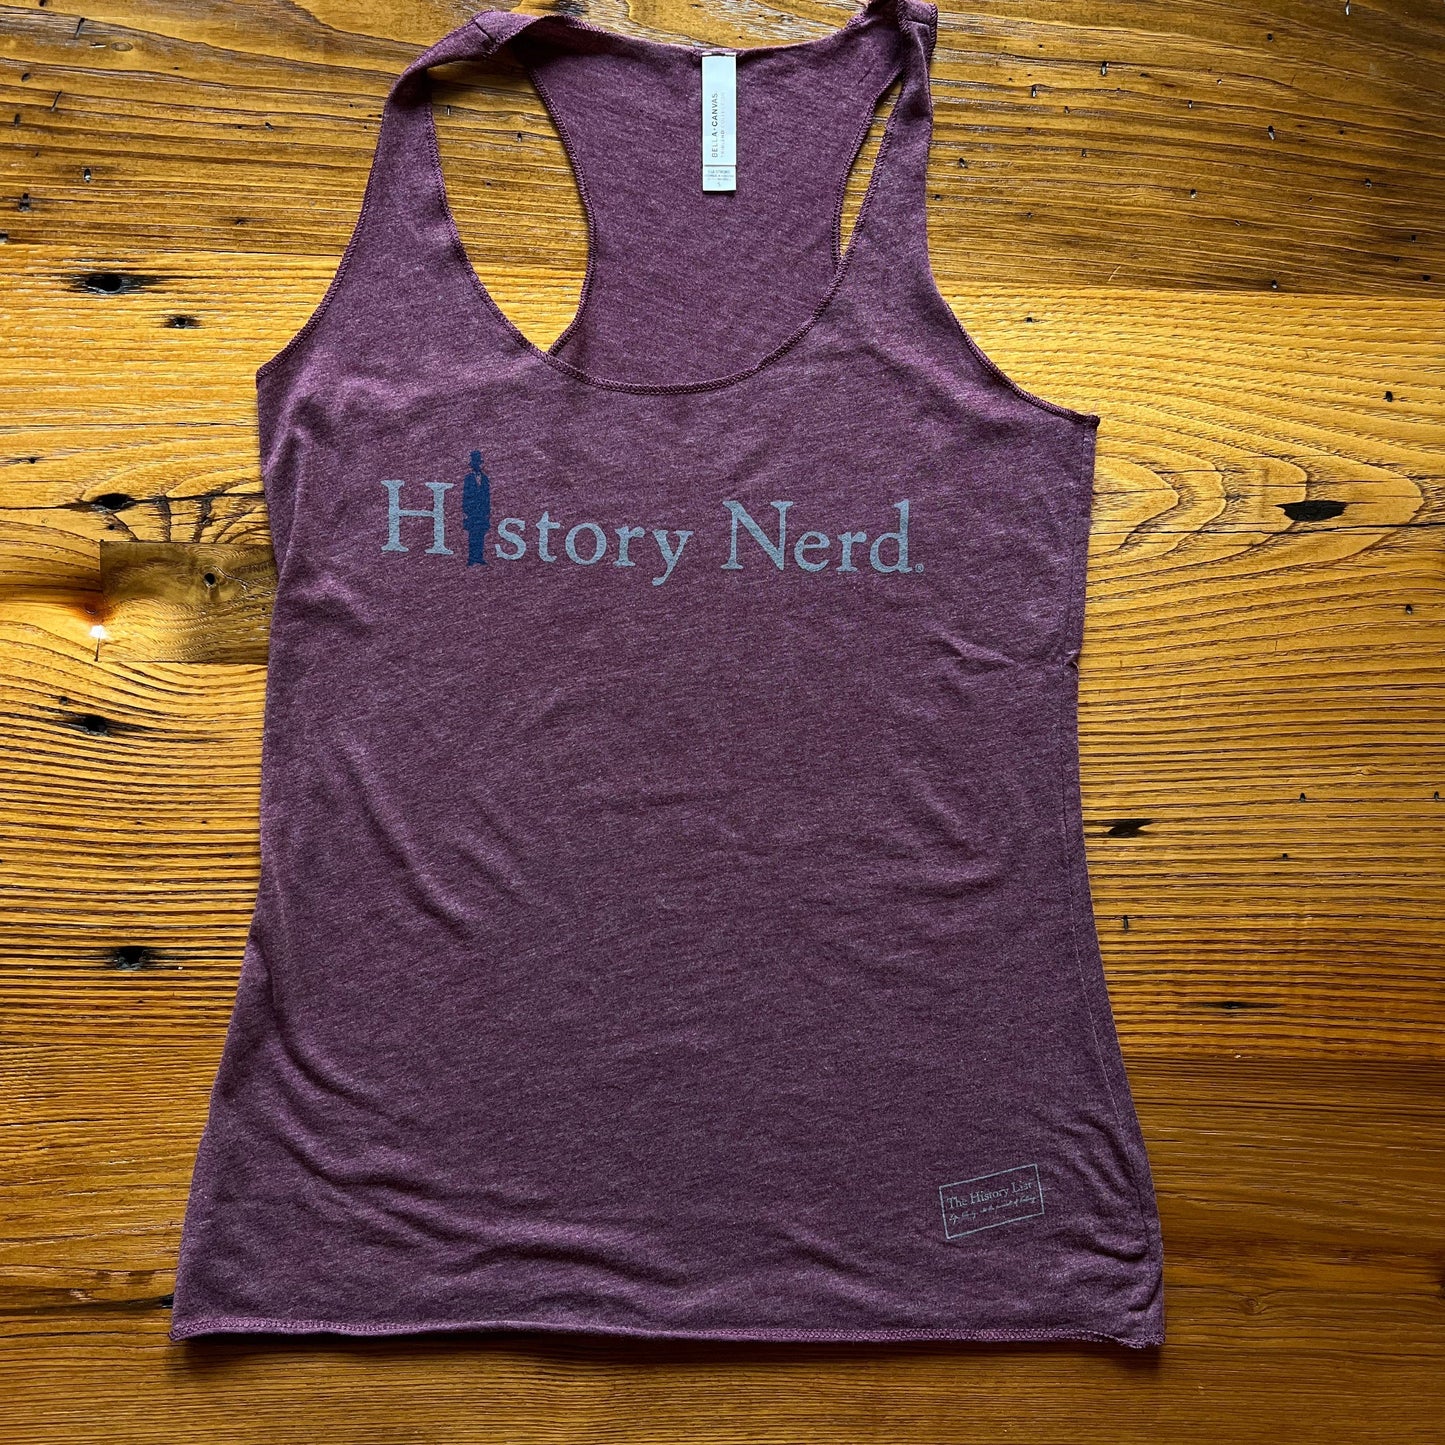 "History Nerd" Tank top for women, with Abraham Lincoln from The History List store